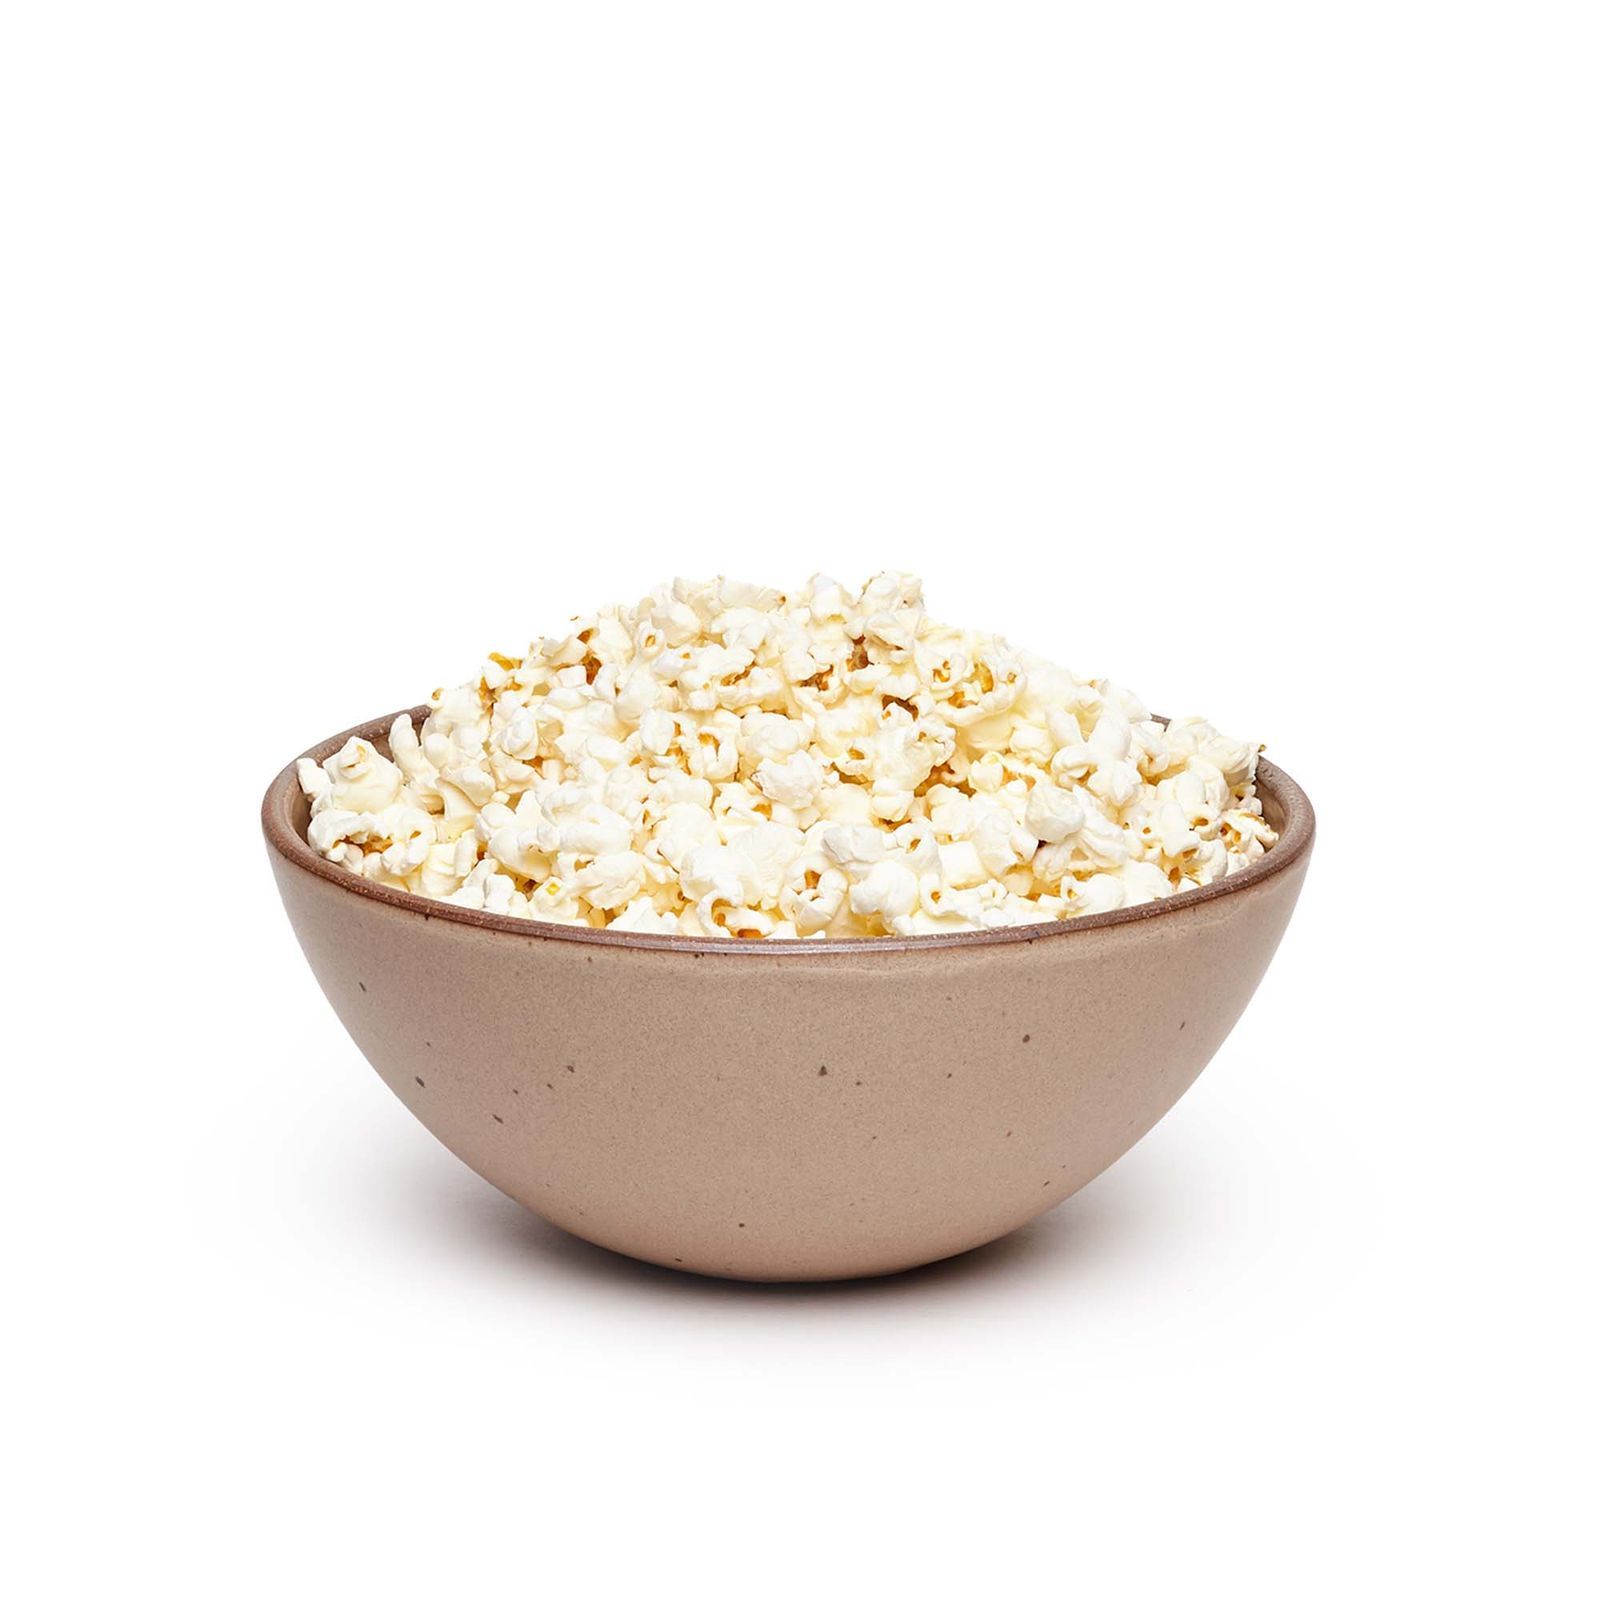 A light earthy brown colored bowl with a full bag of microwave popcorn in it, ready for movie night.